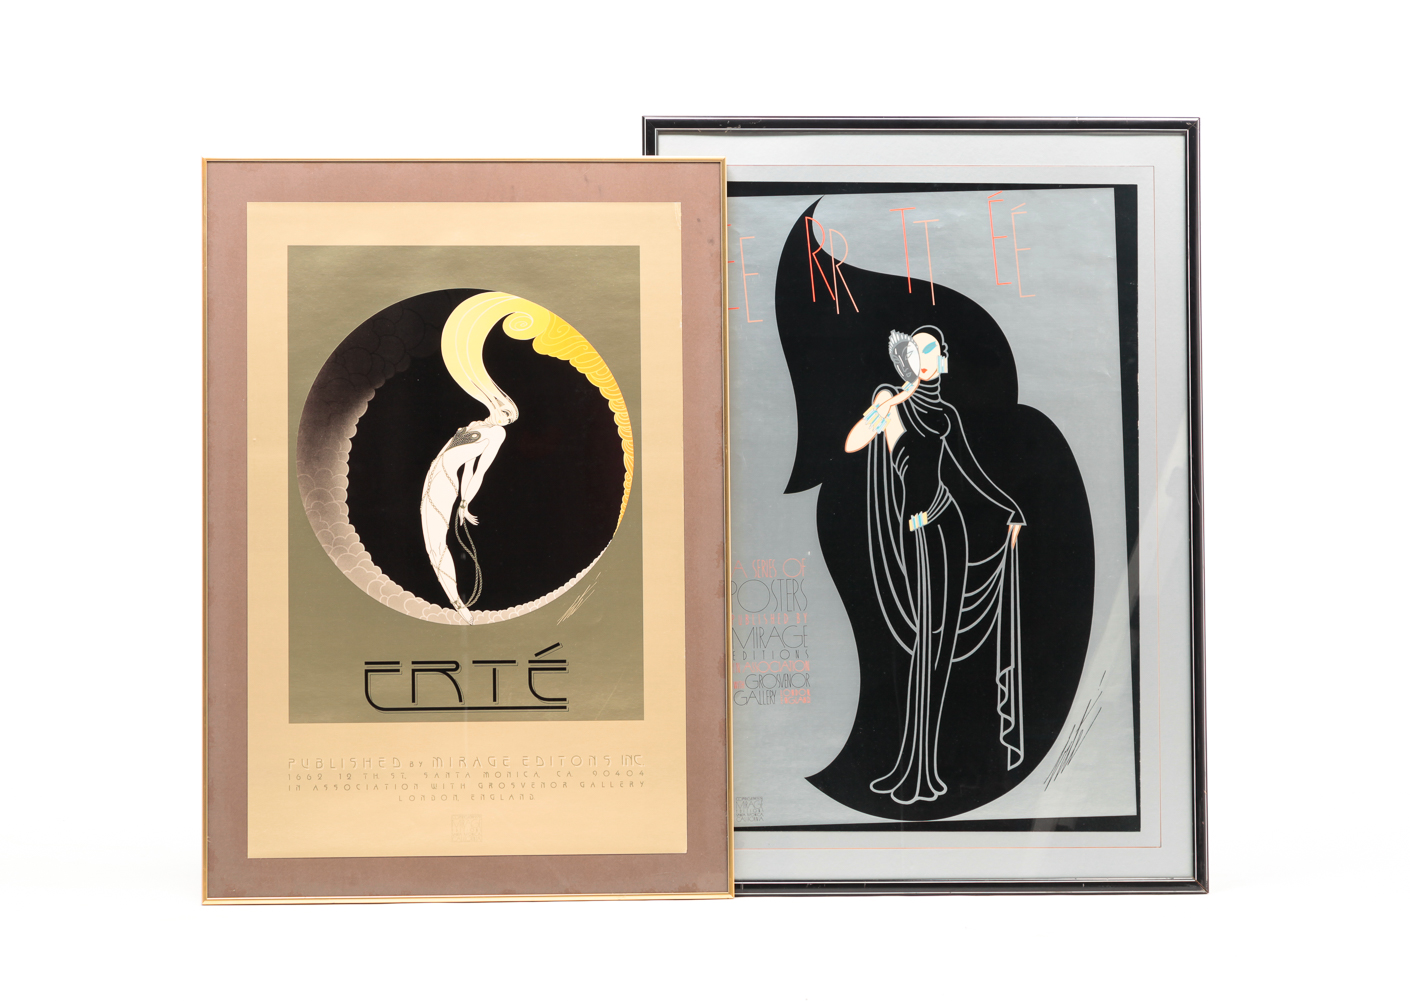 TWO ERTE POSTERS BY MIRAGE EDITIONS.